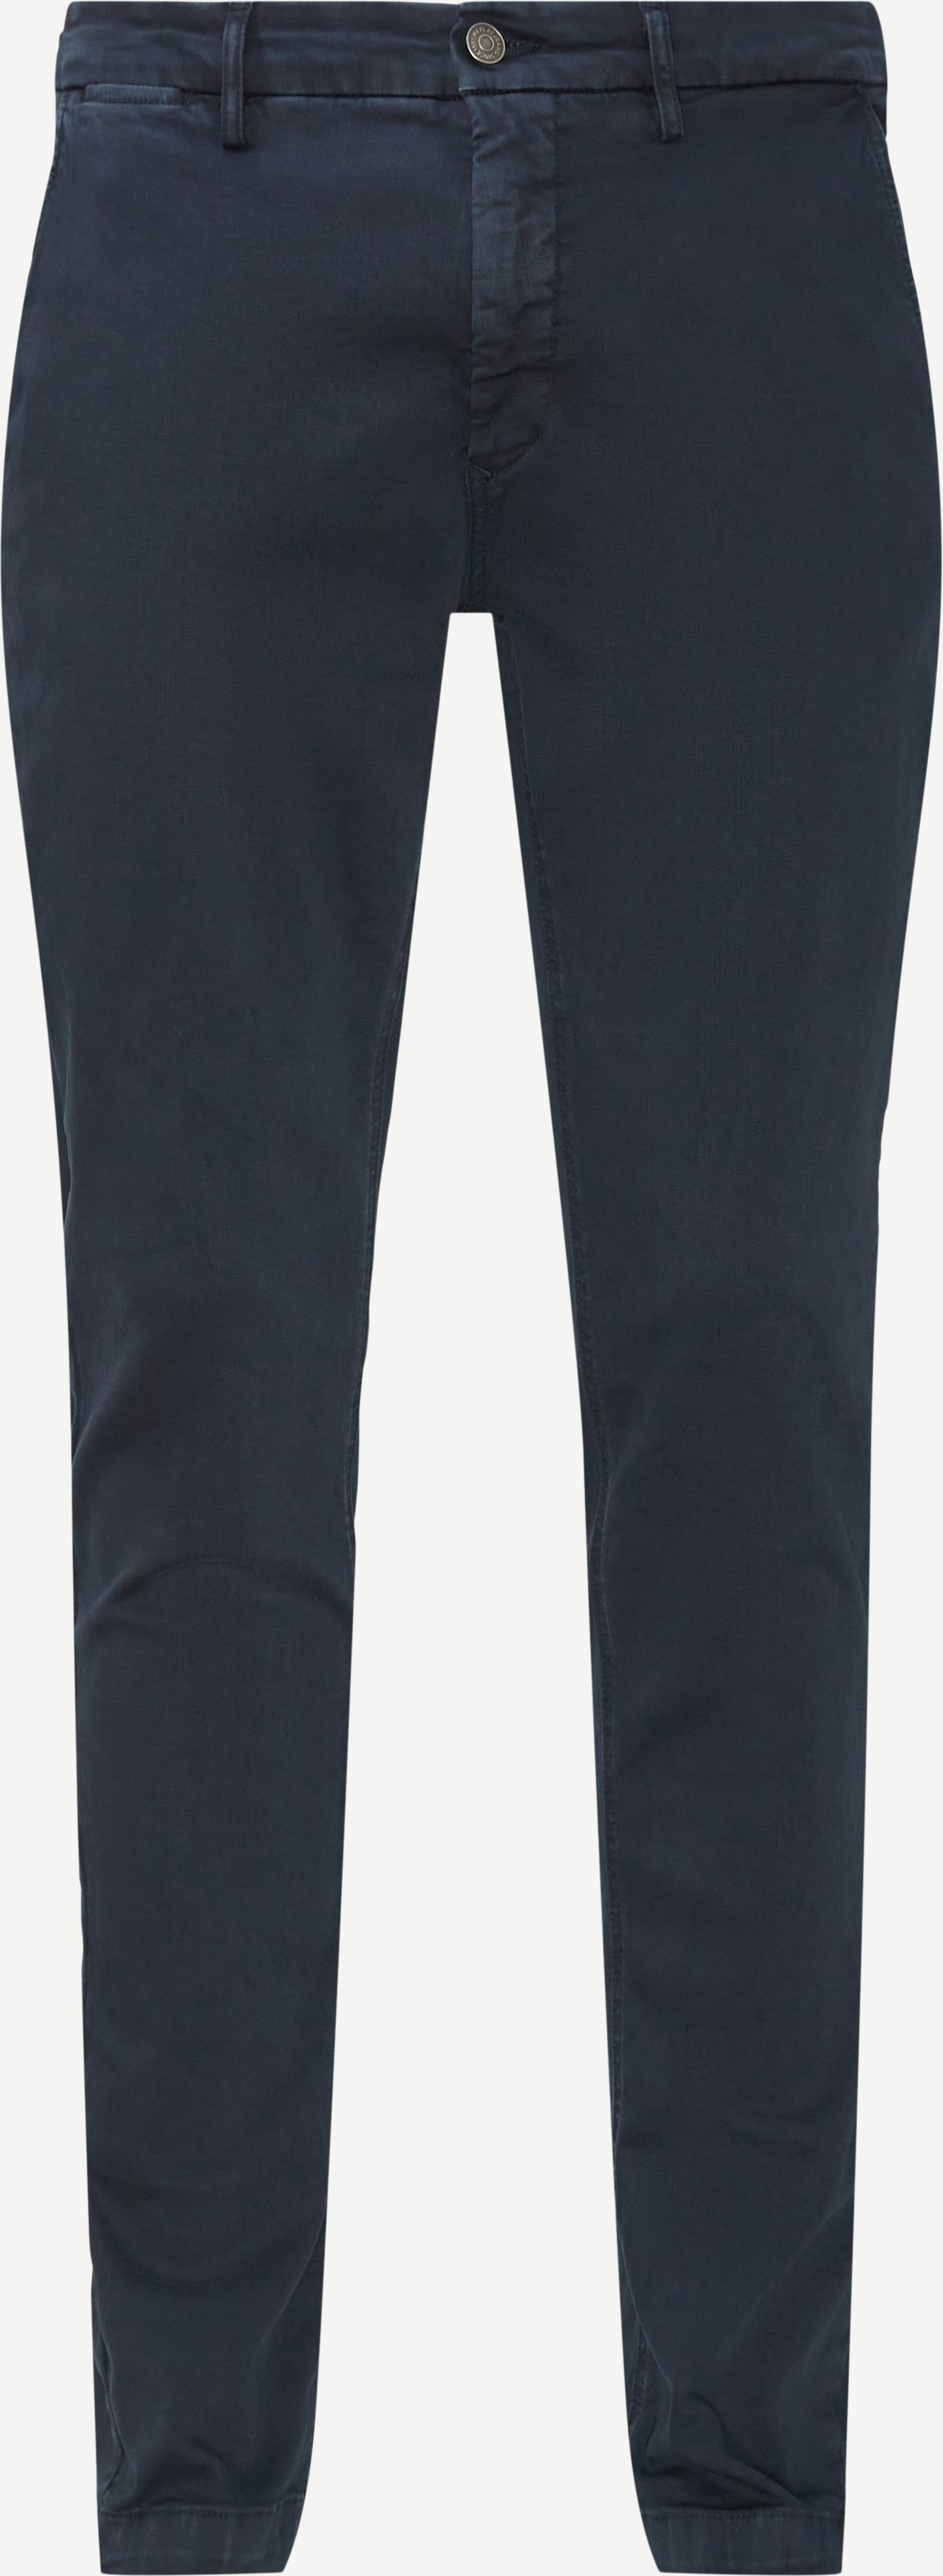 M9627L Chinos - Trousers - Slim fit - Blue